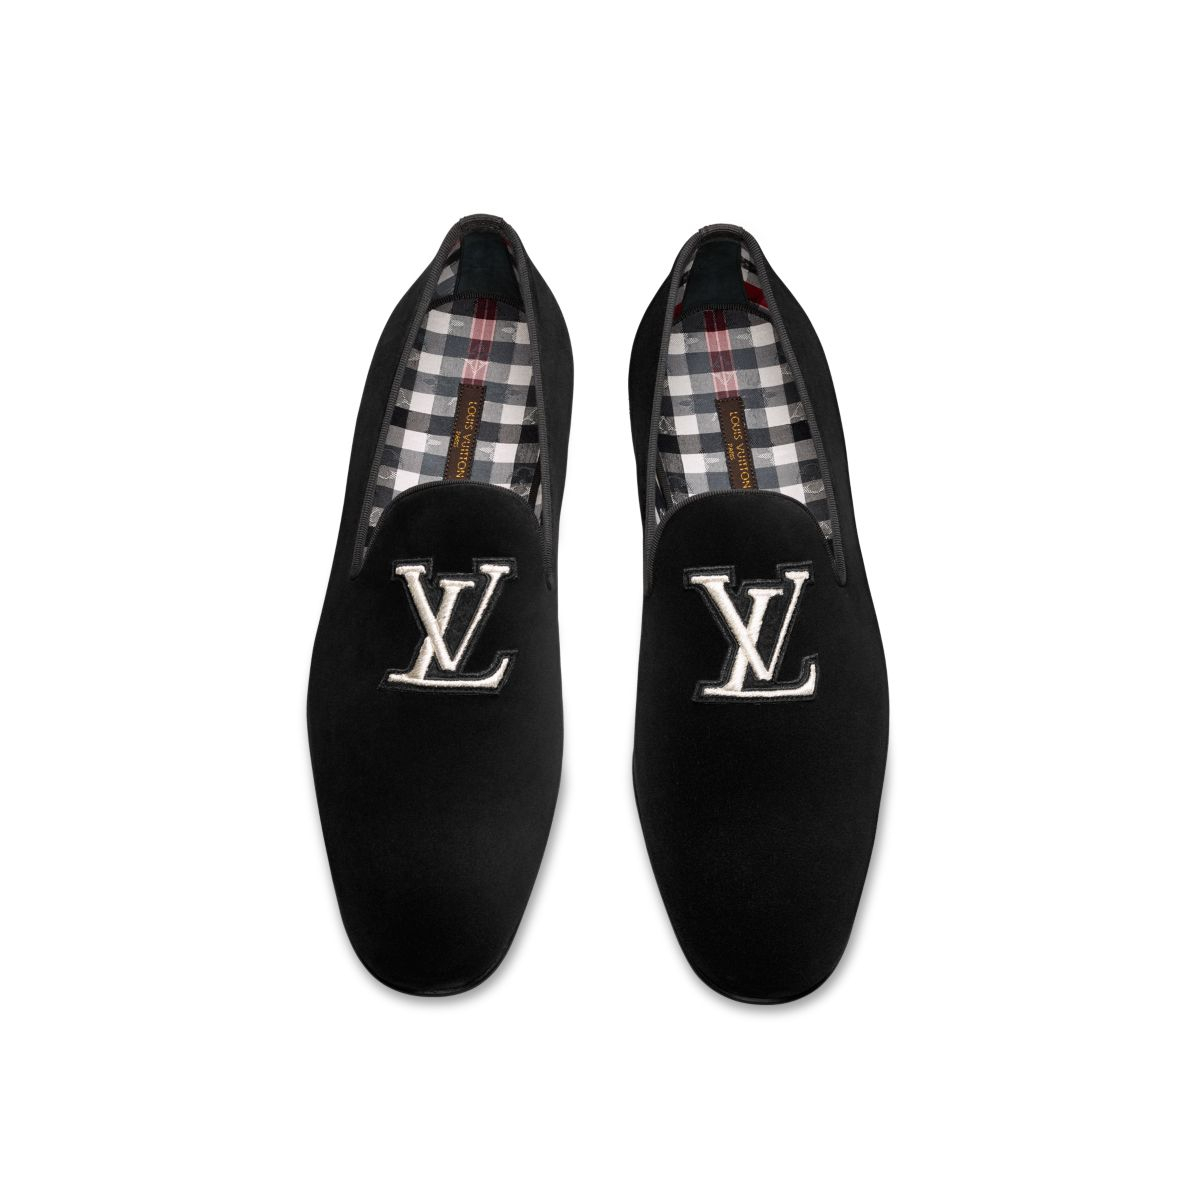 white louis vuitton loafers, louboutins shoes